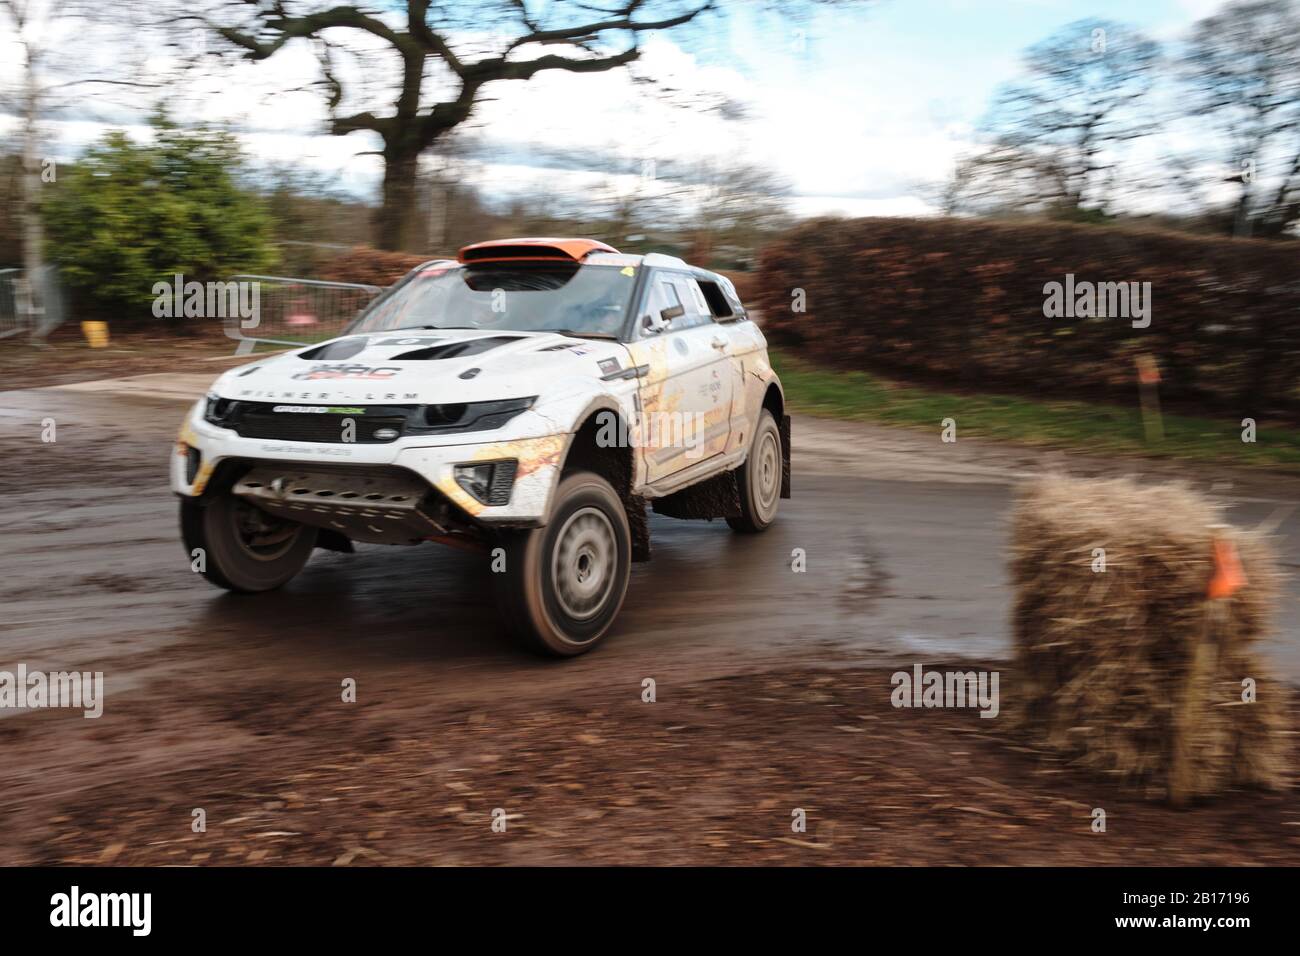 Stoneleigh Park, Warwickshire, UK. 23rd February 2020. Milner LRM rally car during the 2020 Race Retro at Stoneleigh Park Circuit. Photo by Gergo Toth / Alamy Live News Stock Photo